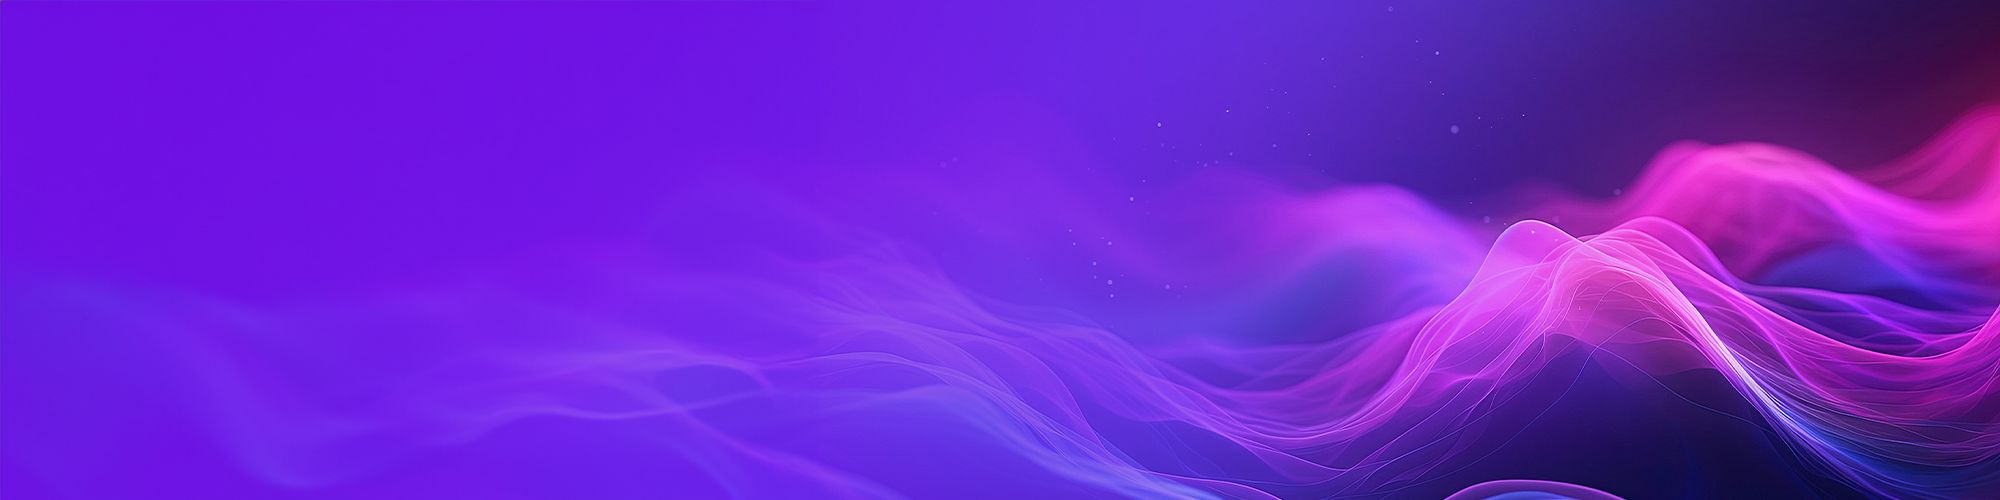 Pink waves on a purple background